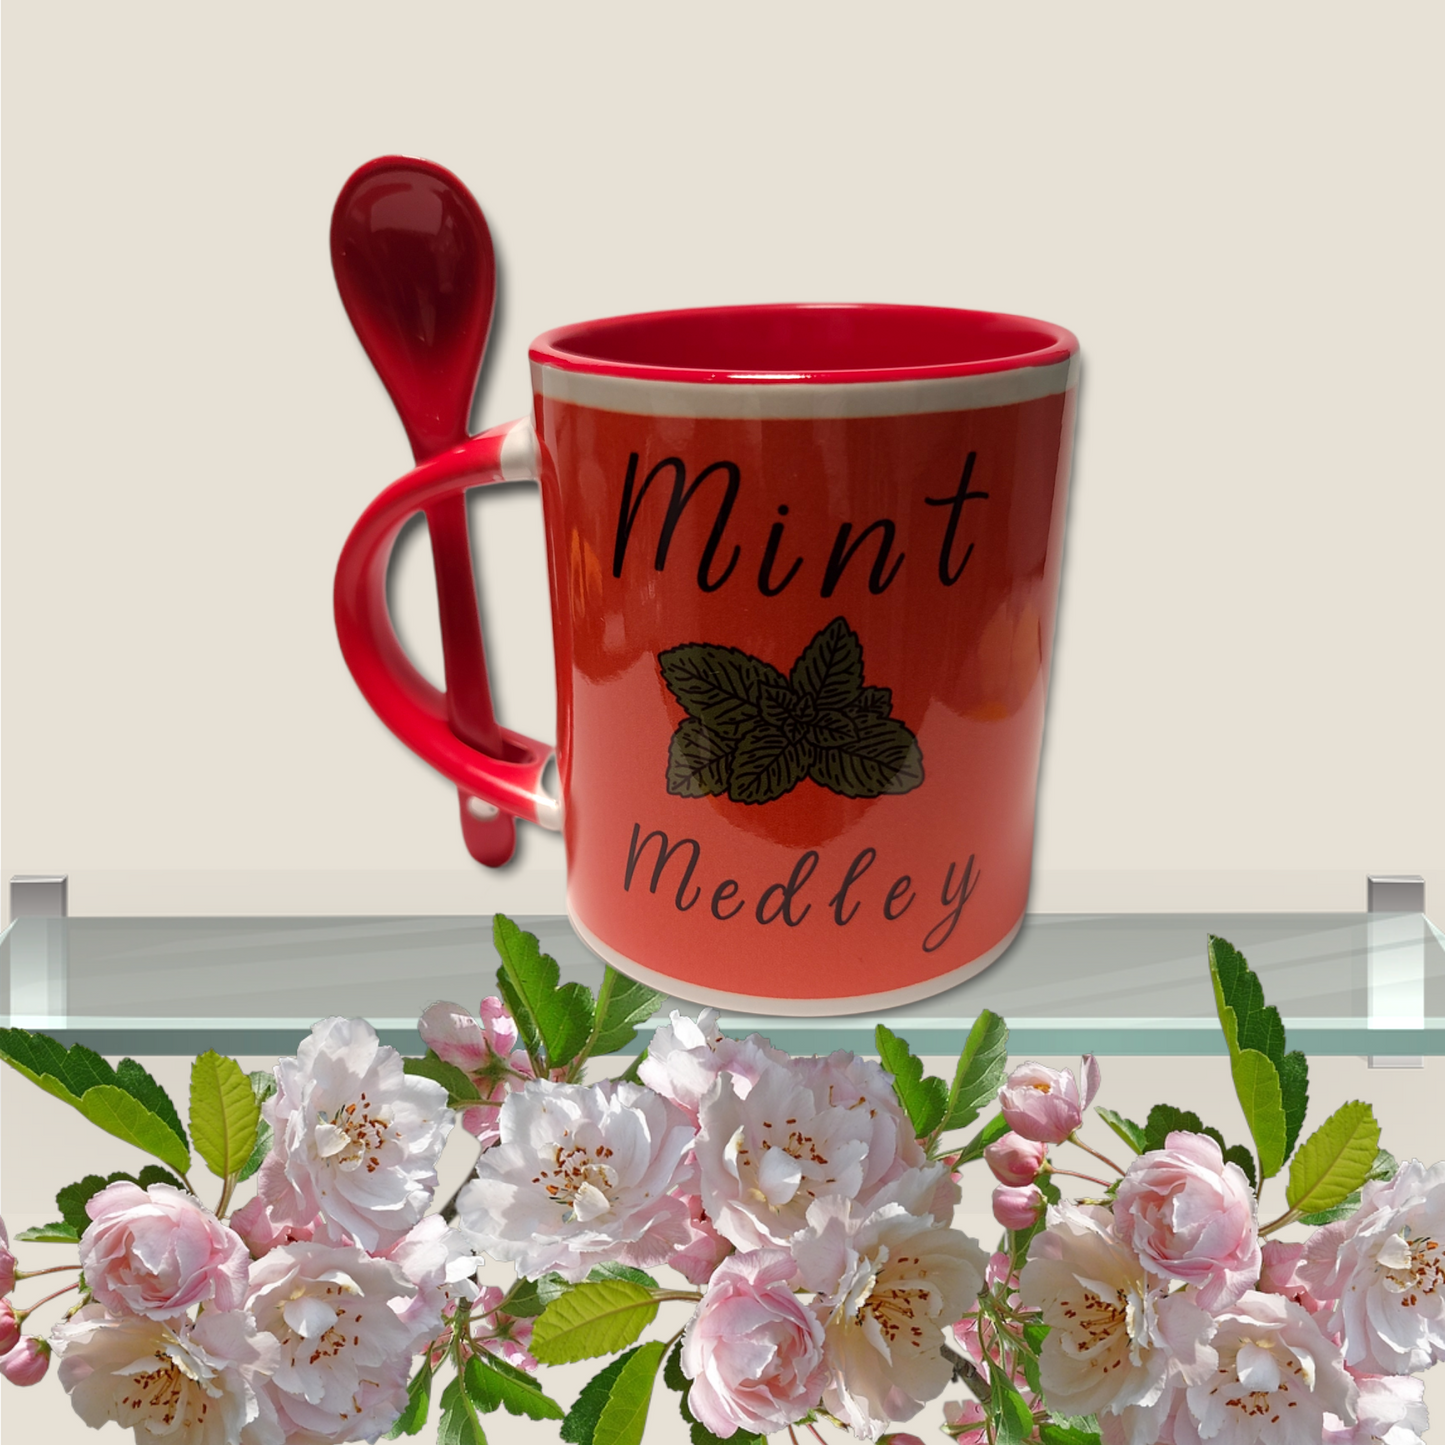 Color Coffee mug with matching attached spoon, Personalized tea cup Customized teacup for a gift. Hot beverage holder with name, mint medley